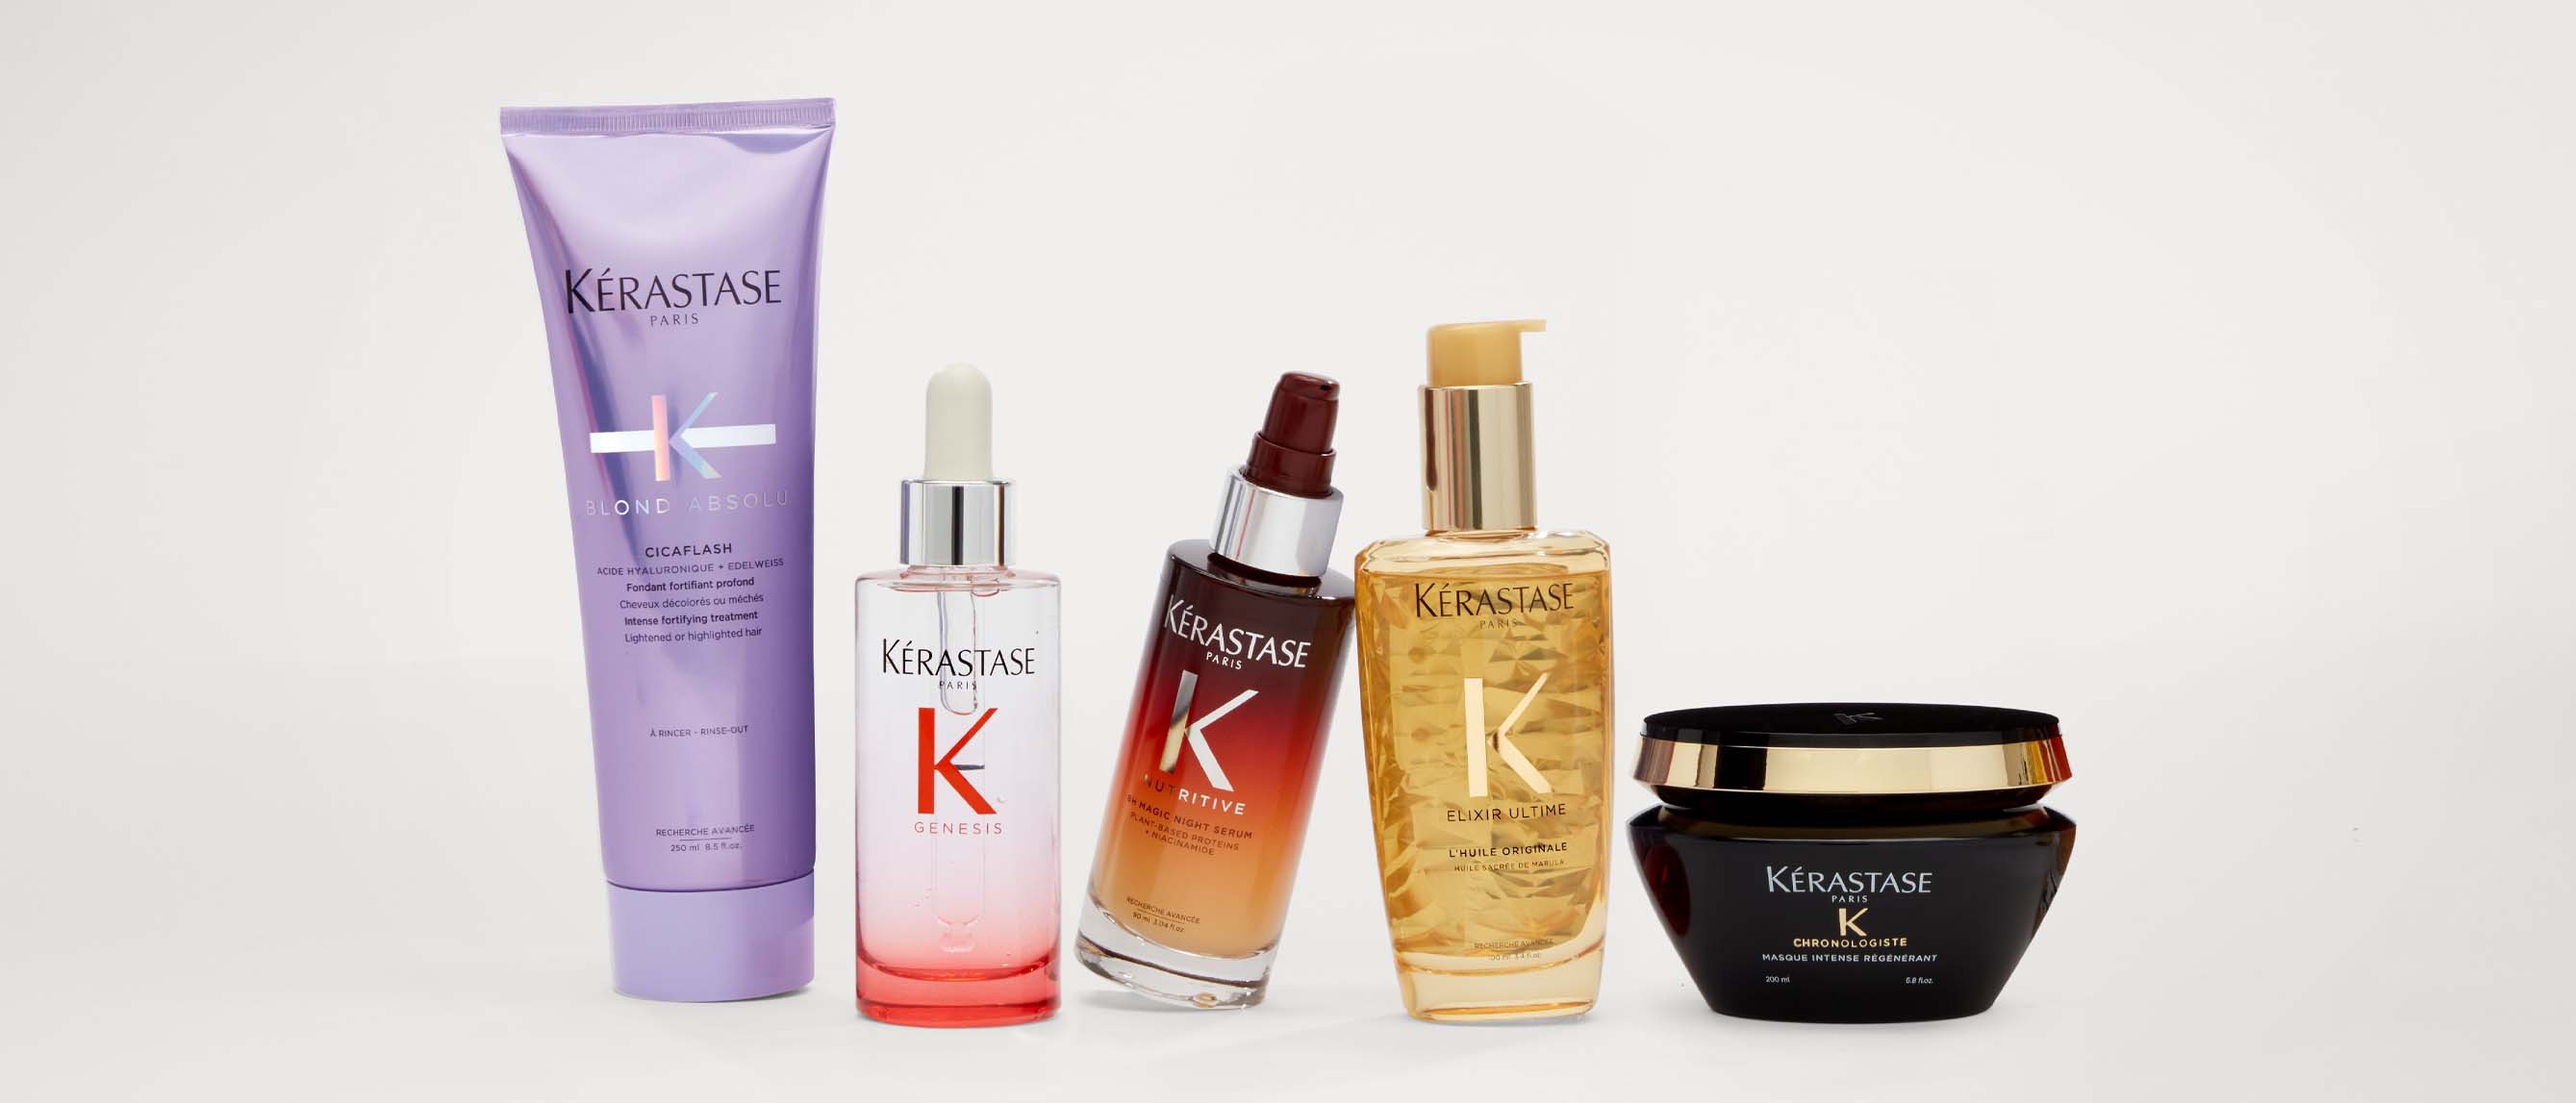 Every day’s a good hair day with these Kérastase bestsellers